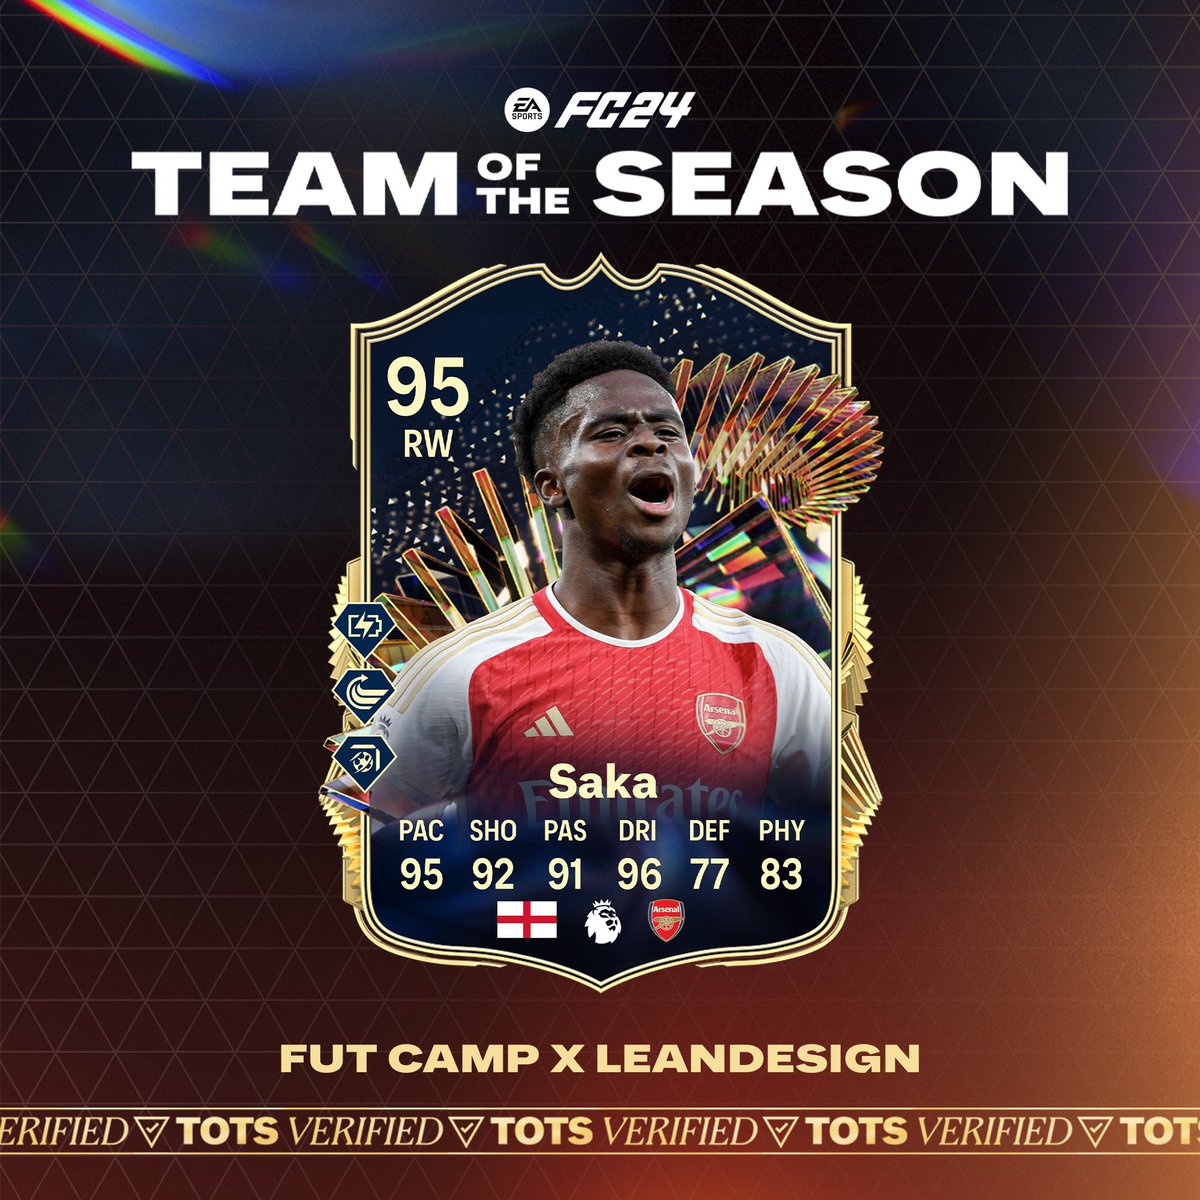 SAKA TOTS OFFICIAL CARD 👀🔴 Official stats ✅ Official PS+ ✅ Official dynamic ✅ Source:(@fut_camp ) #EAFC24 #FC24 #TOTS